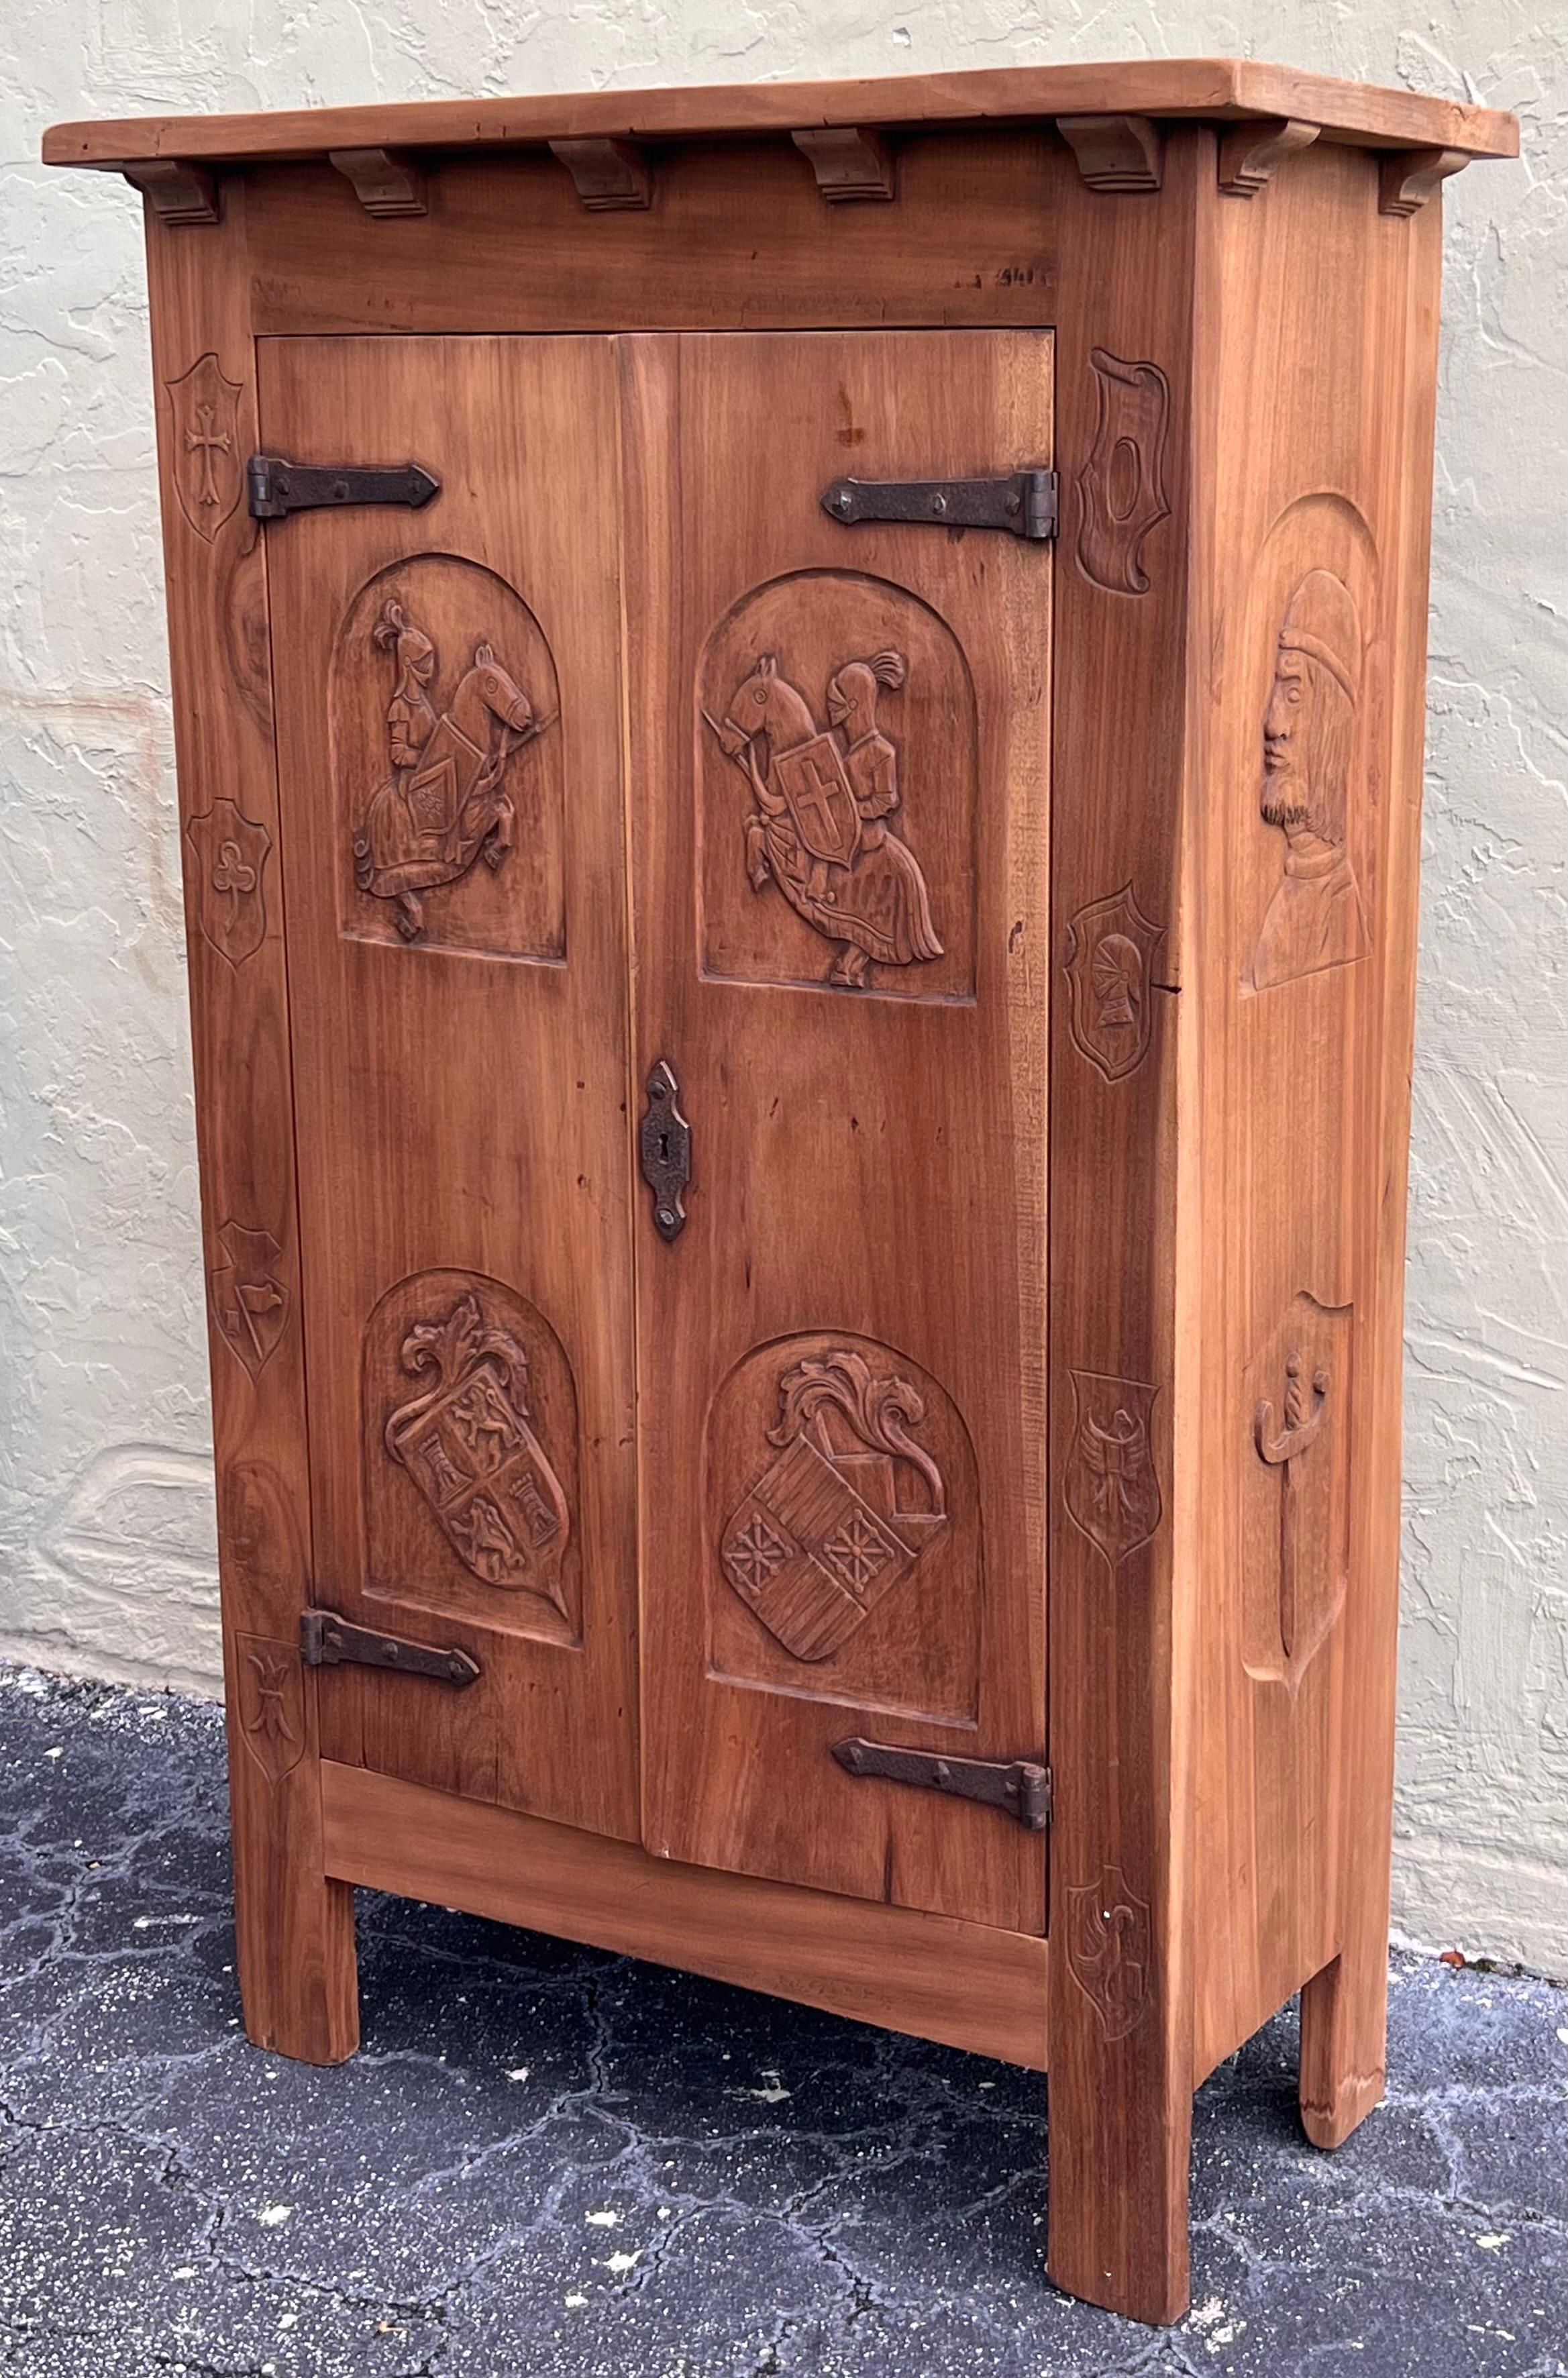 Gothic Revival Spanish Gothic Style Walnut Entry Wardrobe with Five hangers and carvings For Sale